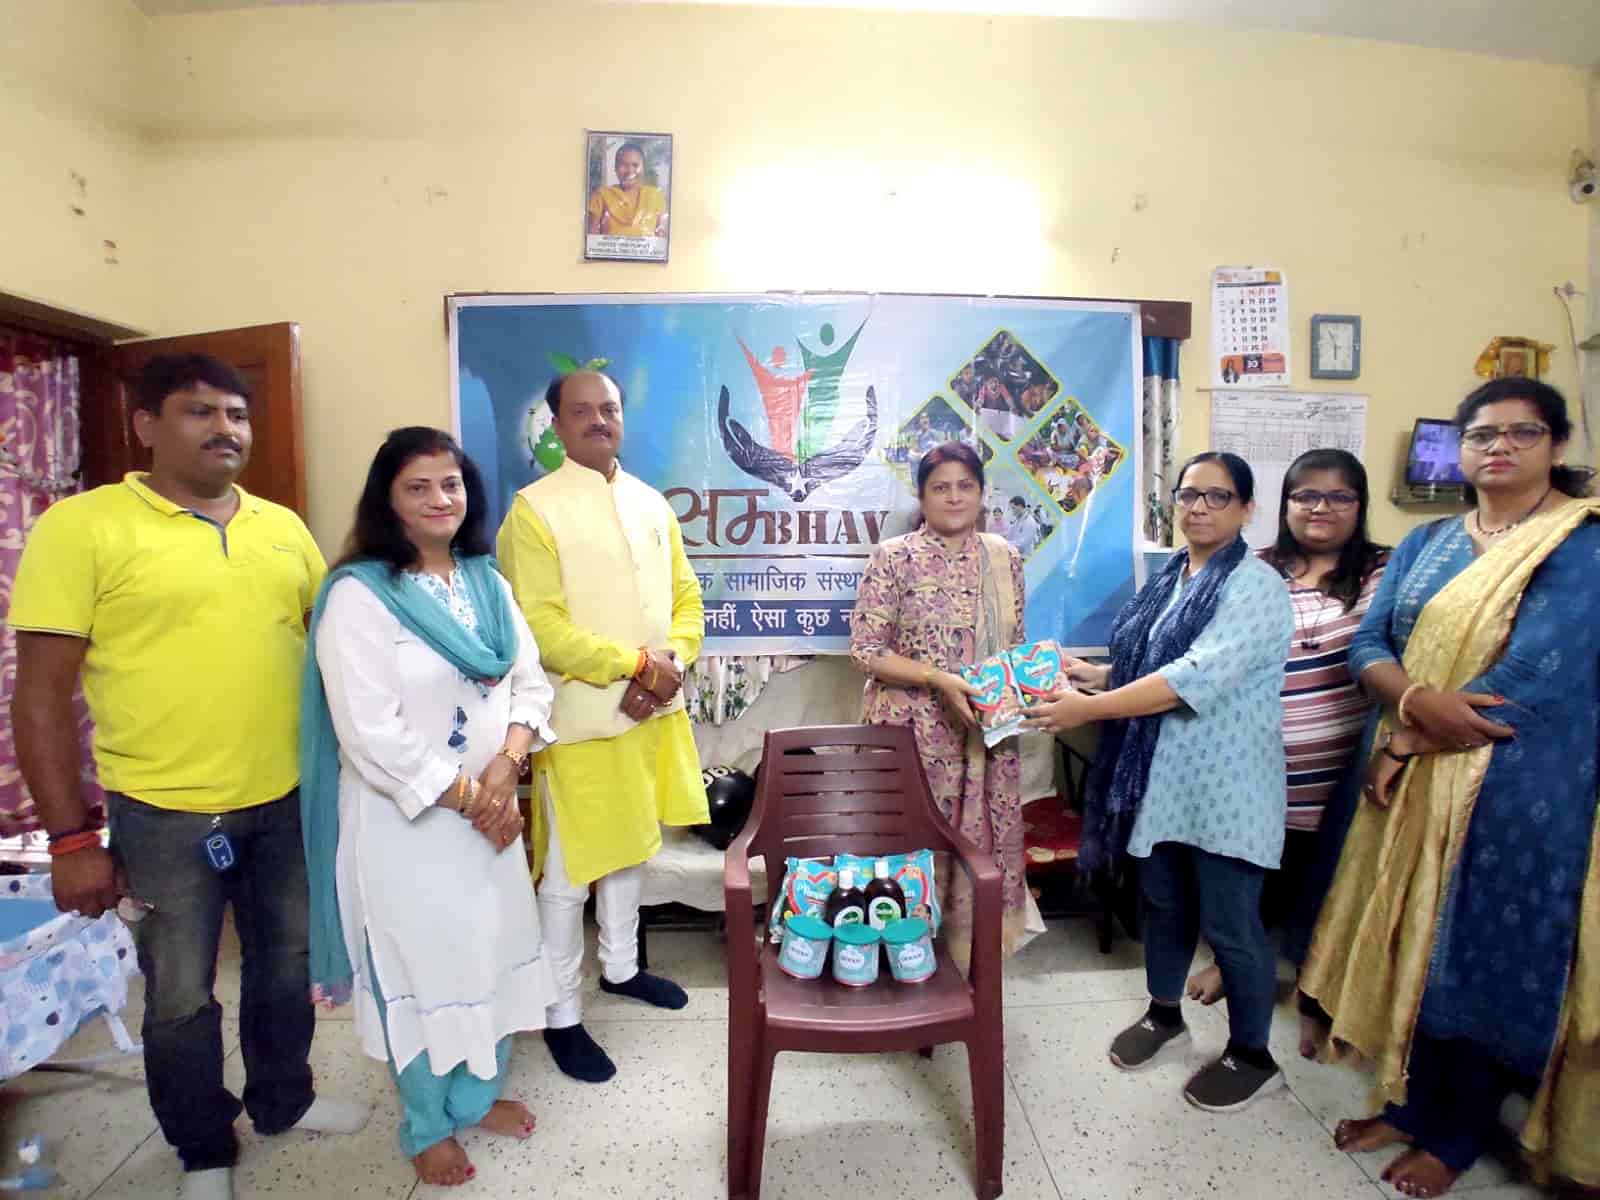 sambhav 2 Sambhav NGO steps up to aid Sahyog Village Child Adoption Center with essential items such as diapers lactogen and dettol met with gratitude Town Post